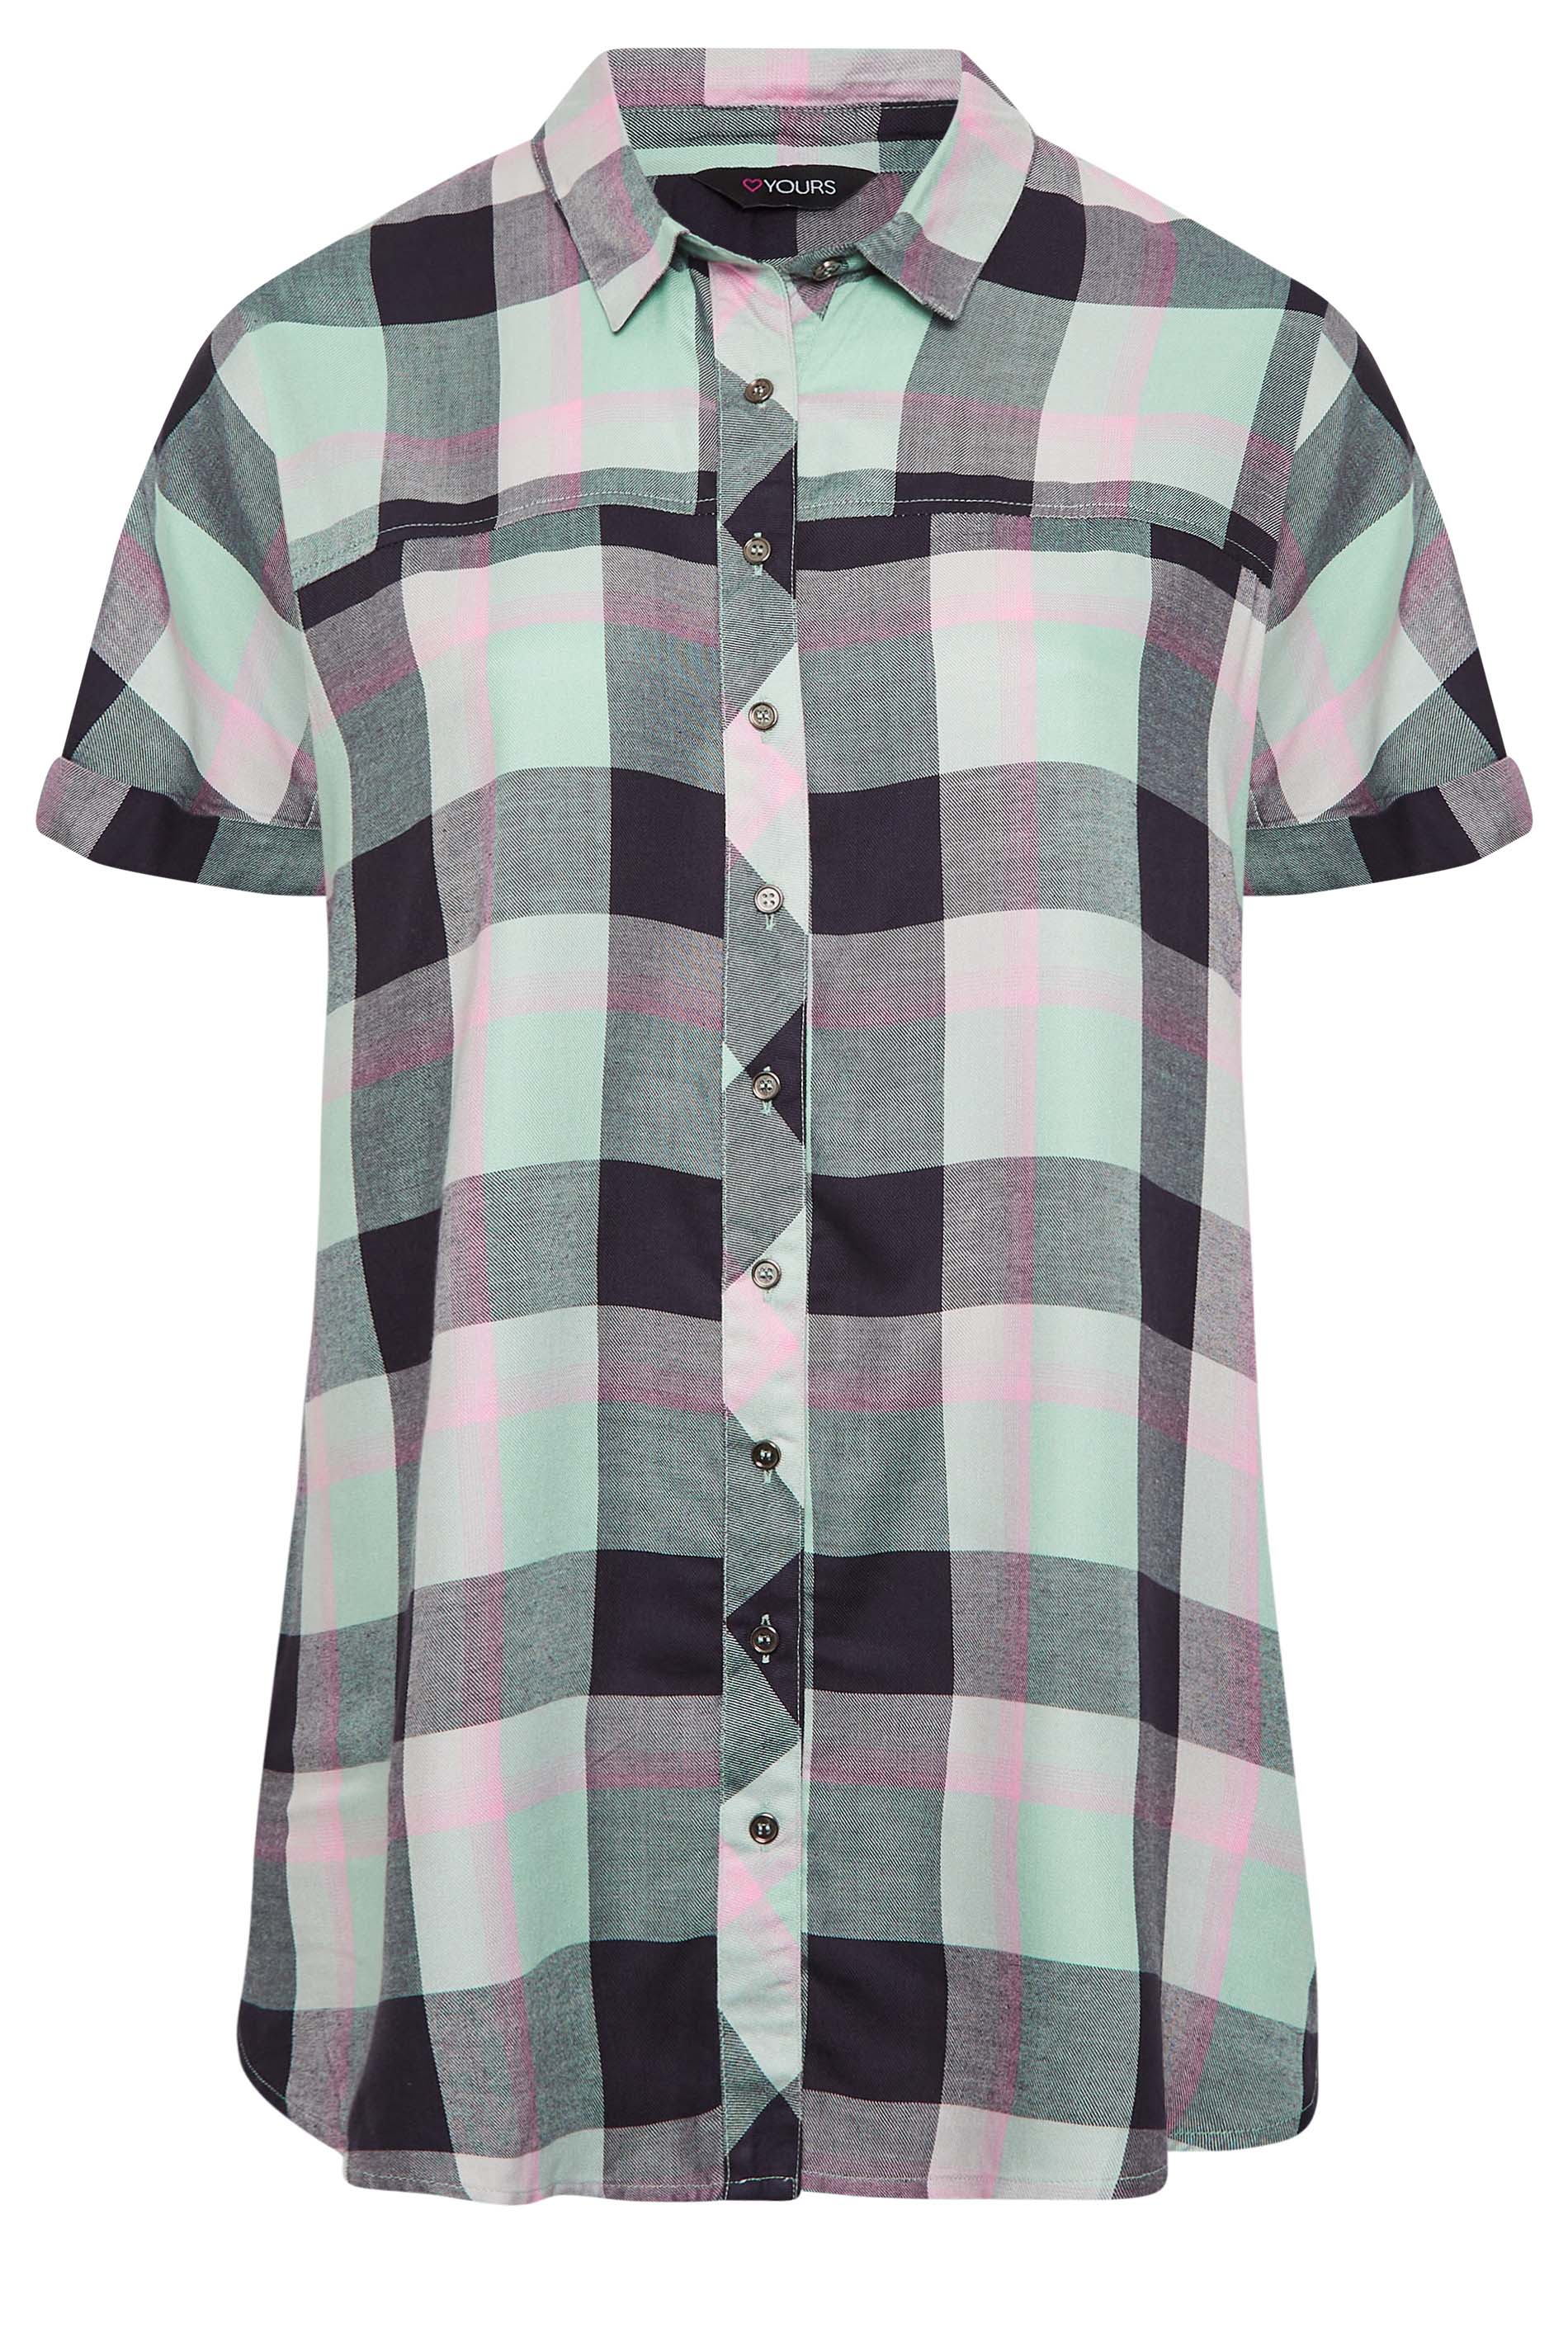 YOURS Plus Size Curve Mint Green & Navy Blue Check Short Sleeve Shirt ...